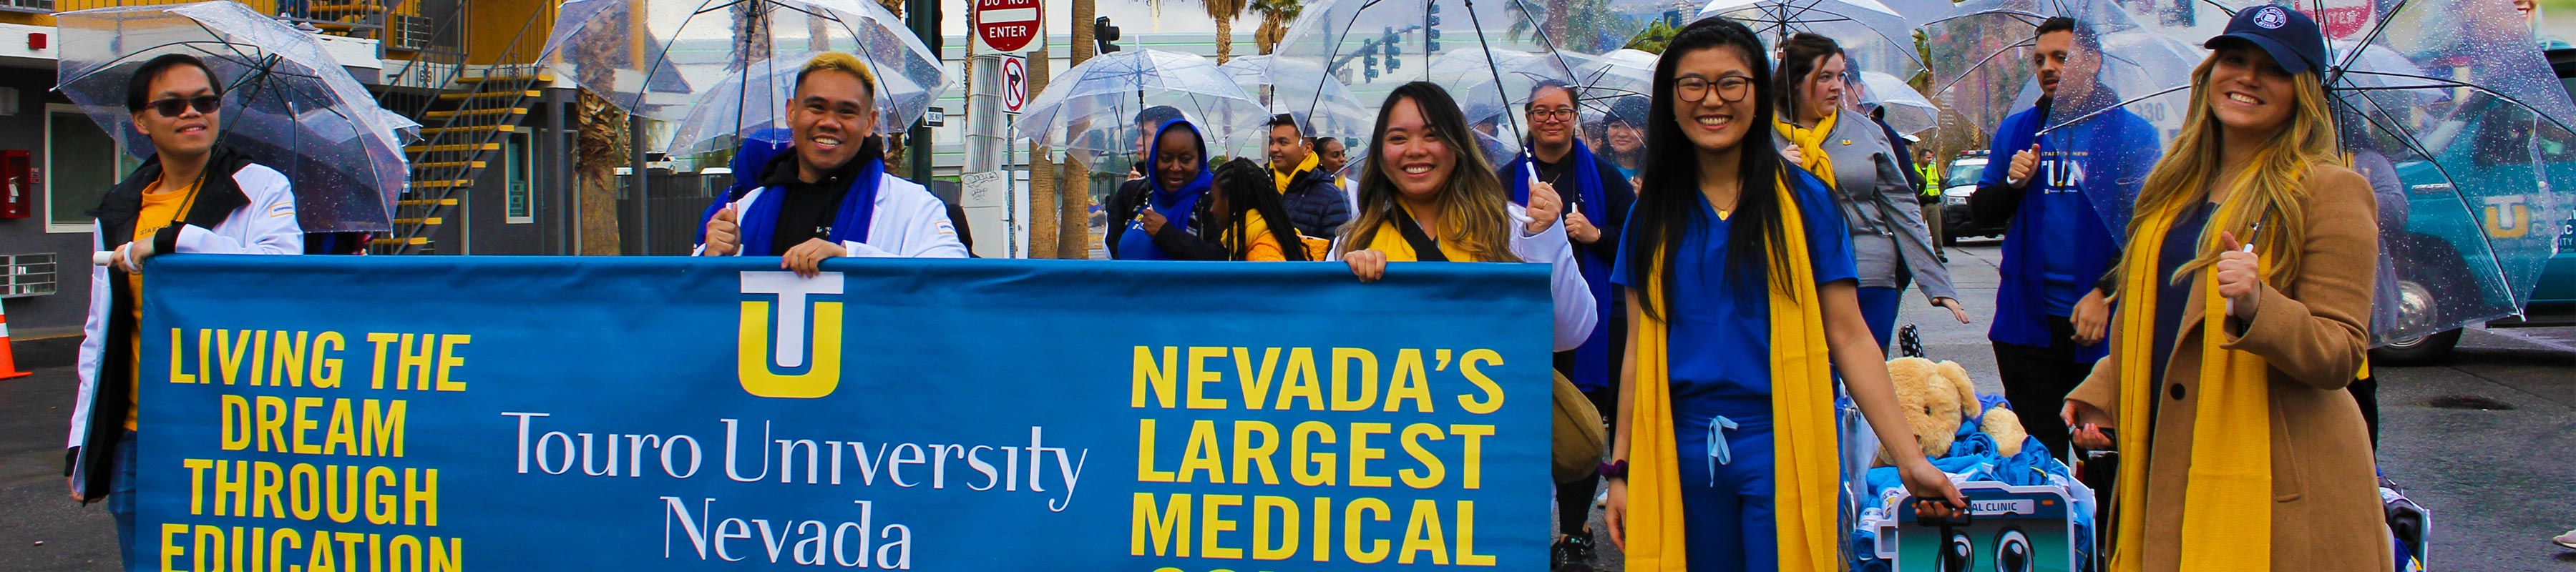 Students marching in a parade with a Touro Nevada banner.